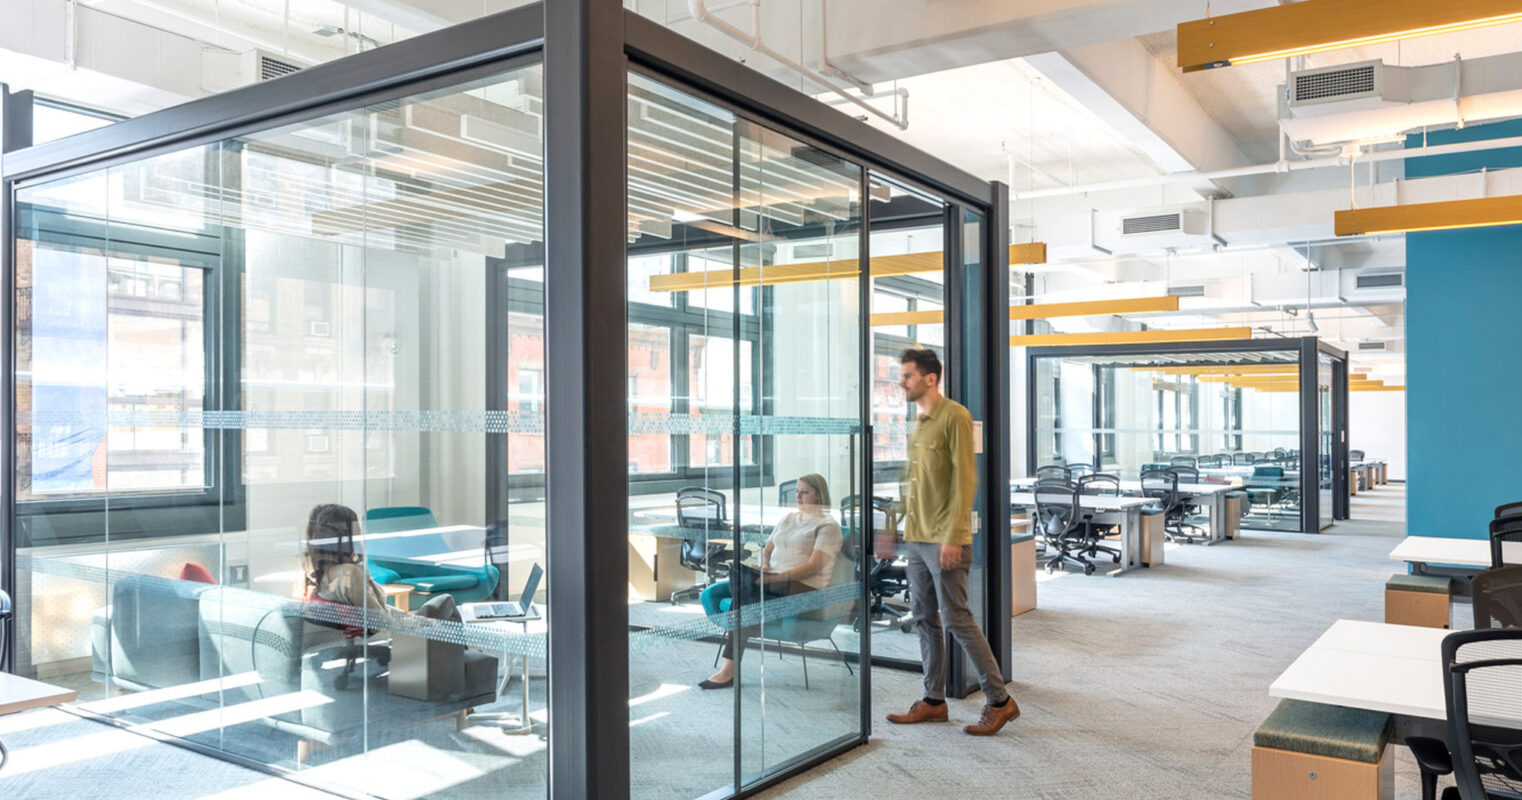 Bright, modern office space featuring glass partition walls creating a semi-private meeting area. Sleek, black frames contrast with the warm wood tones and pops of blue and yellow in the open-plan workspace beyond. Natural light floods the space, enhancing the airy ambiance.